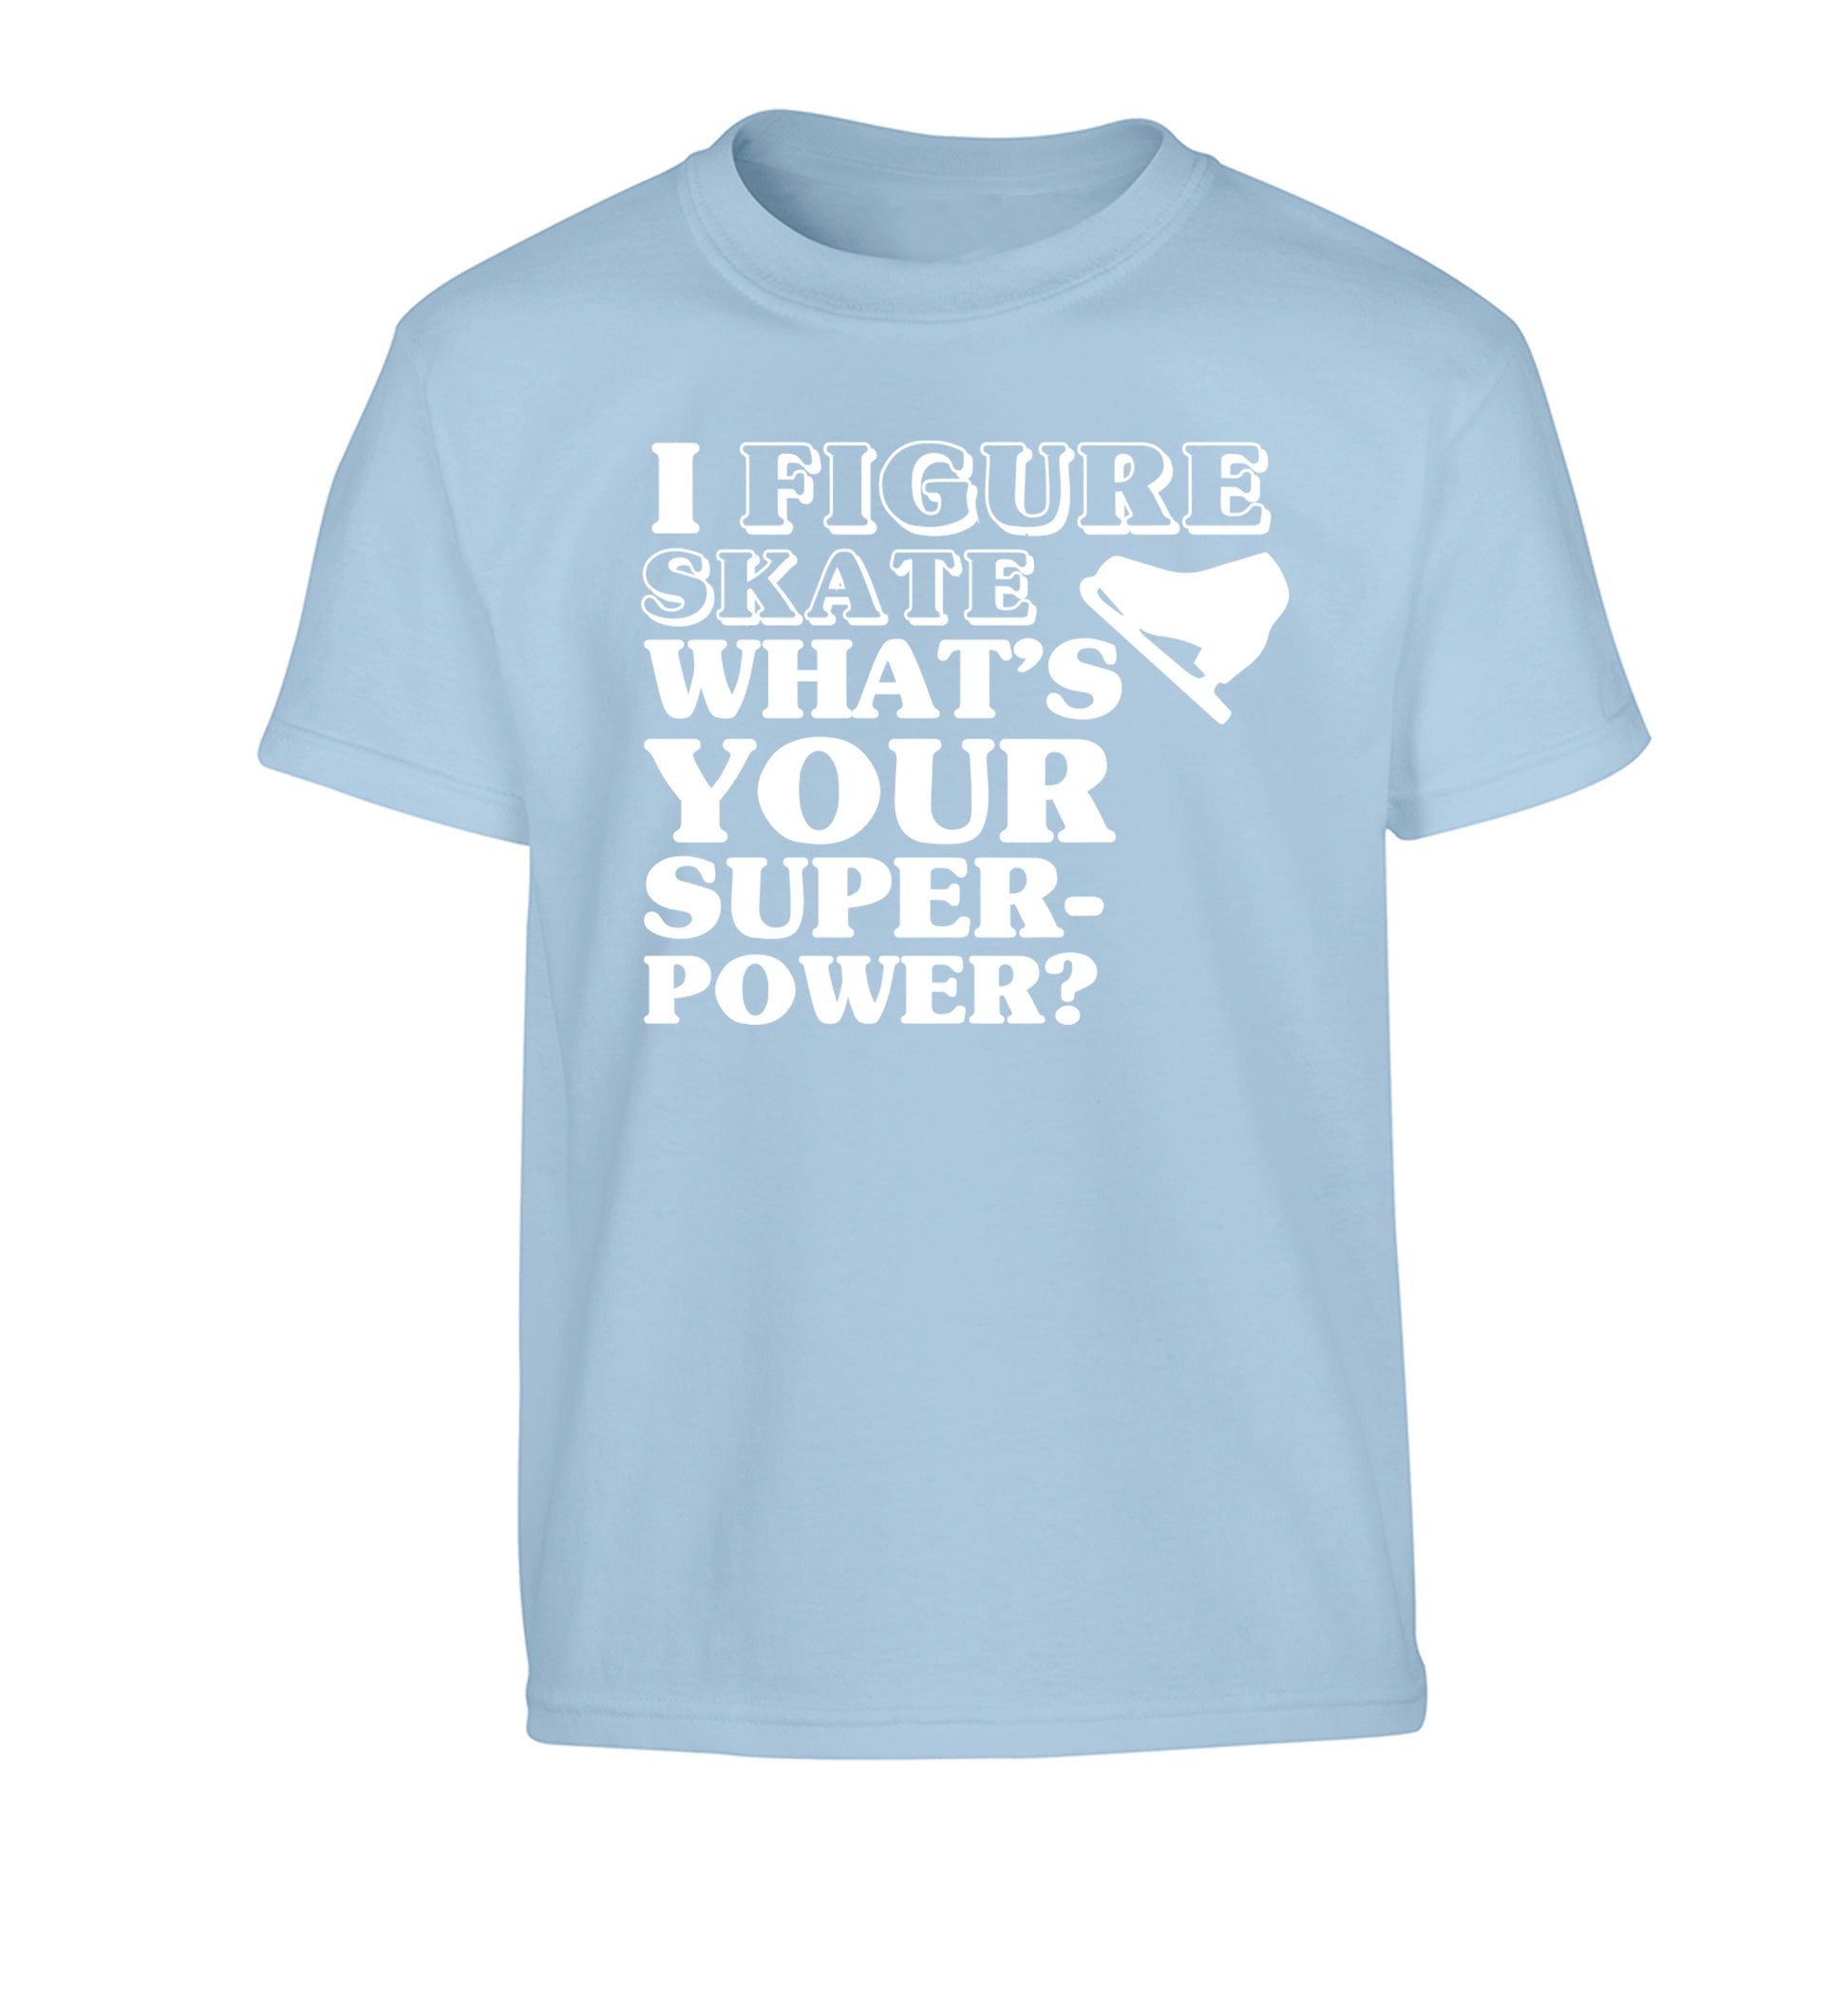 I figure skate what's your superpower? Children's light blue Tshirt 12-14 Years